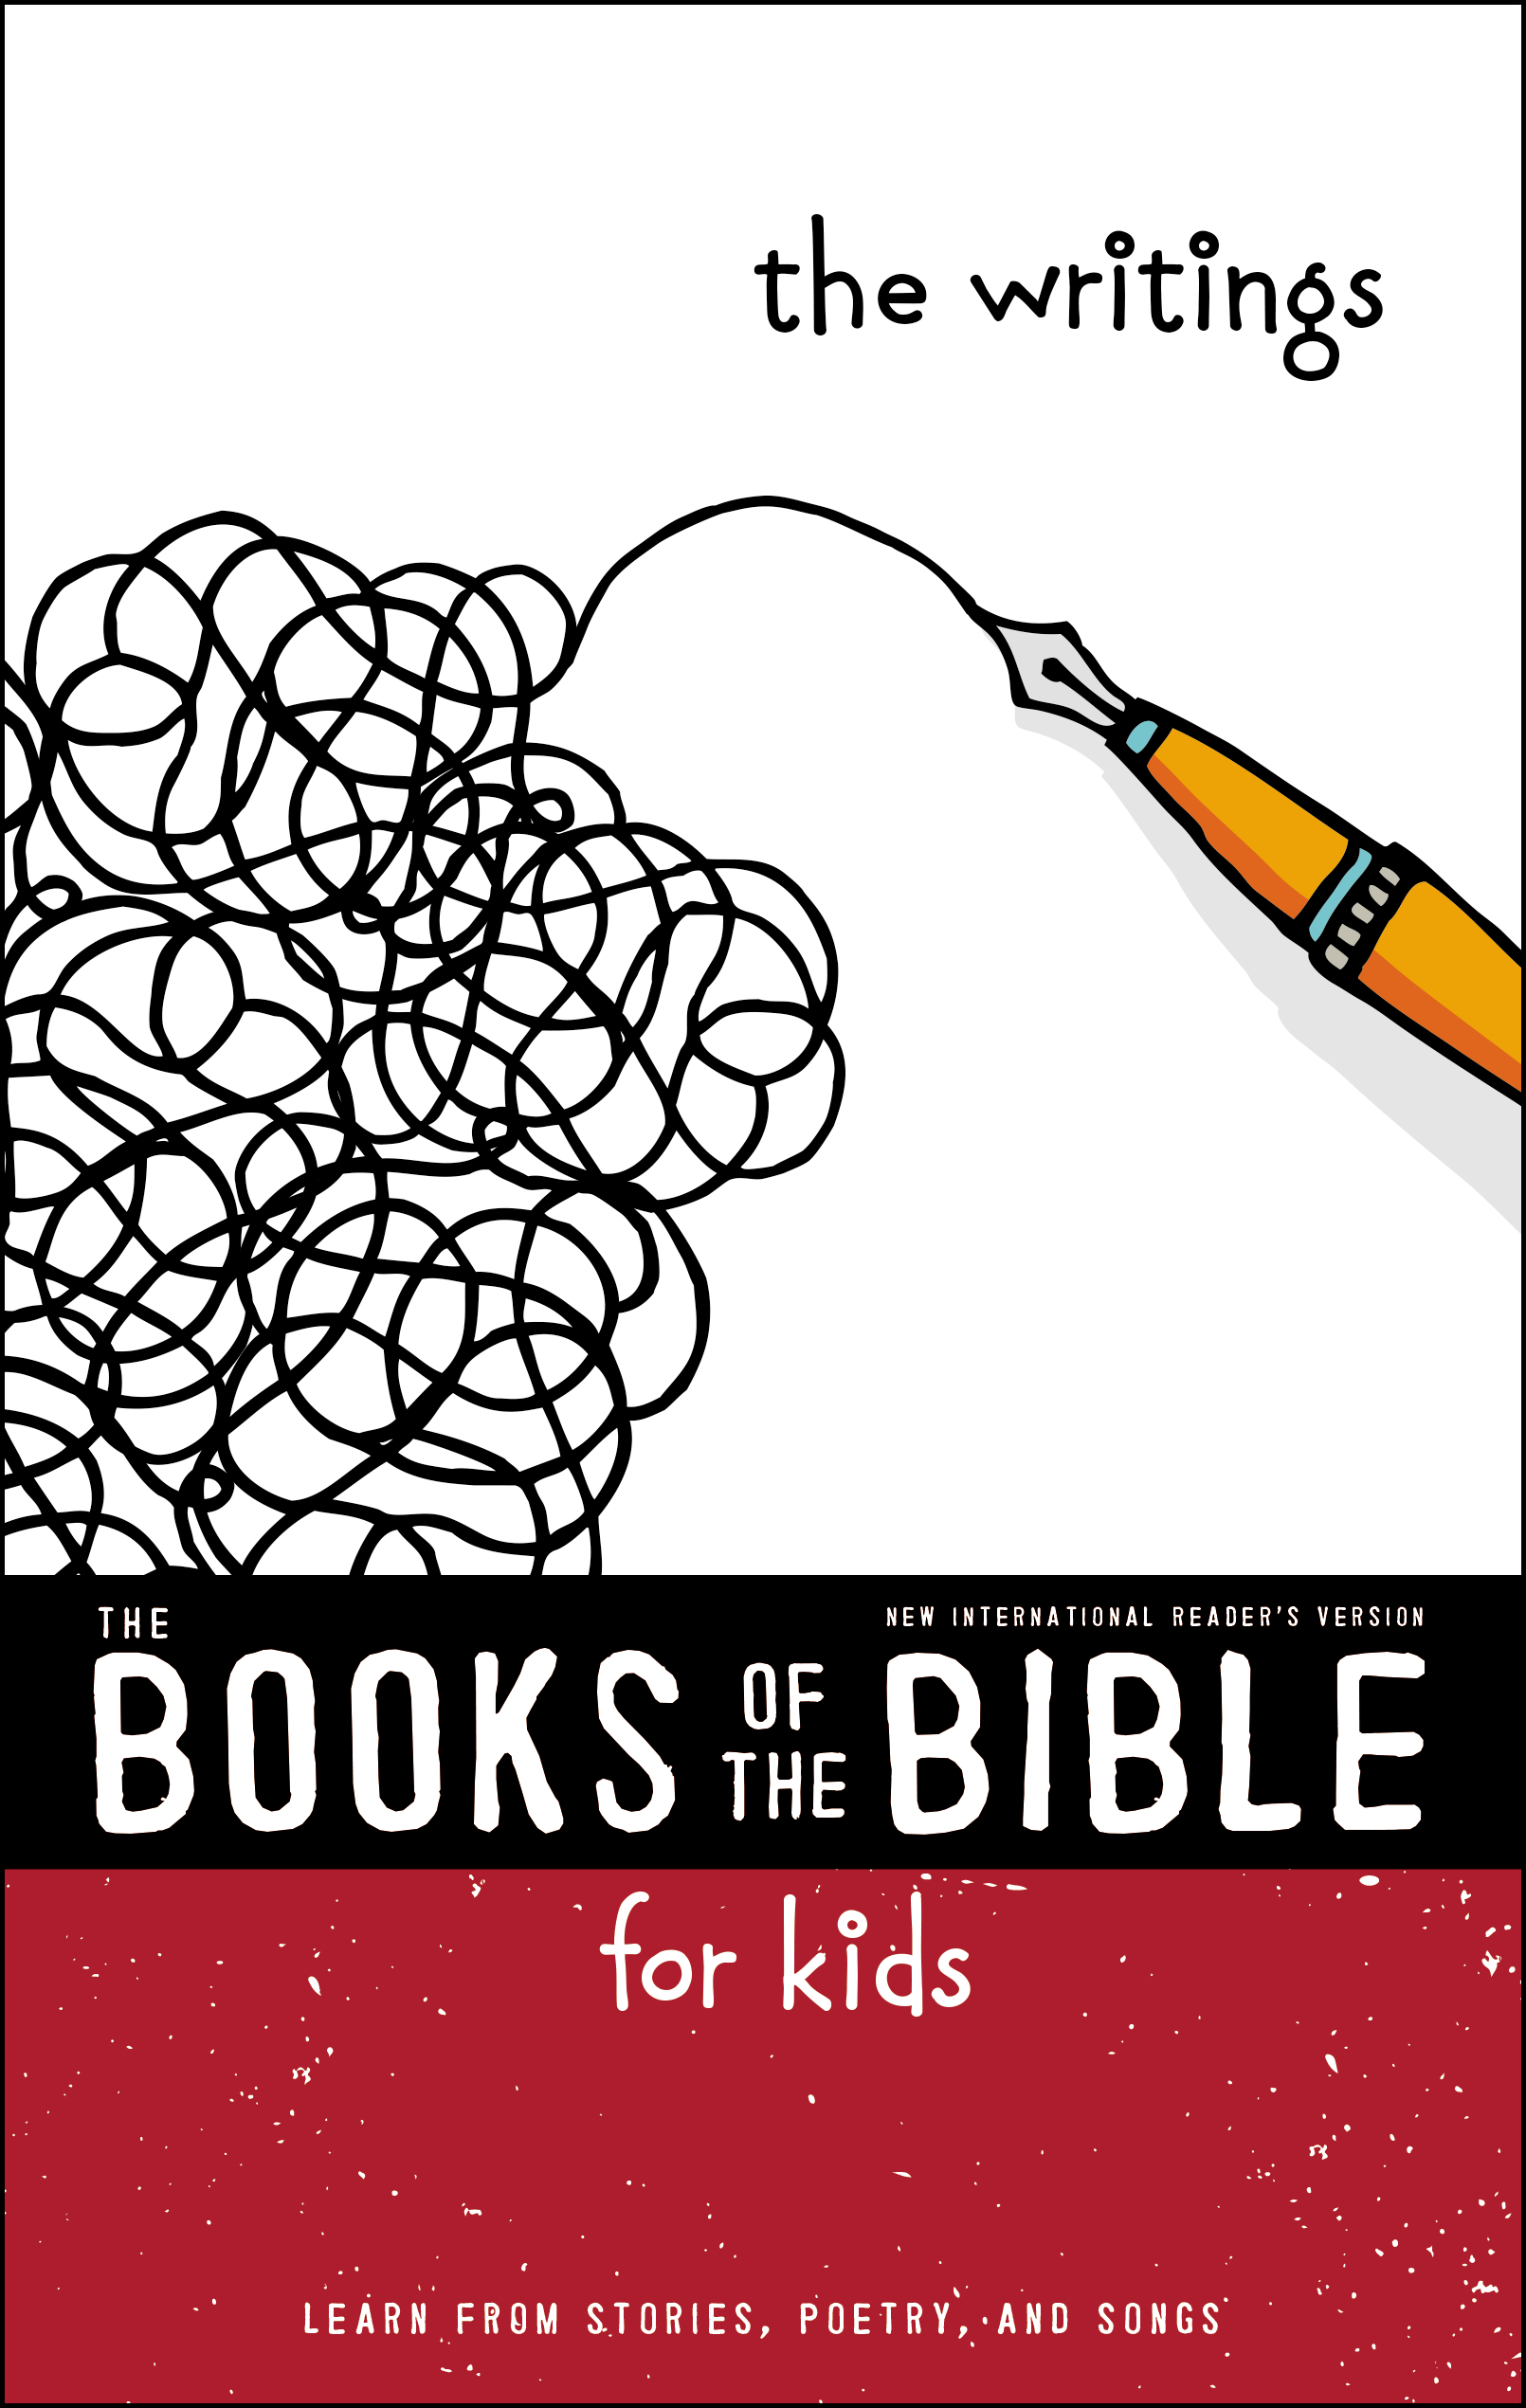 The Books of the Bible For Kids: The Writings, NIV